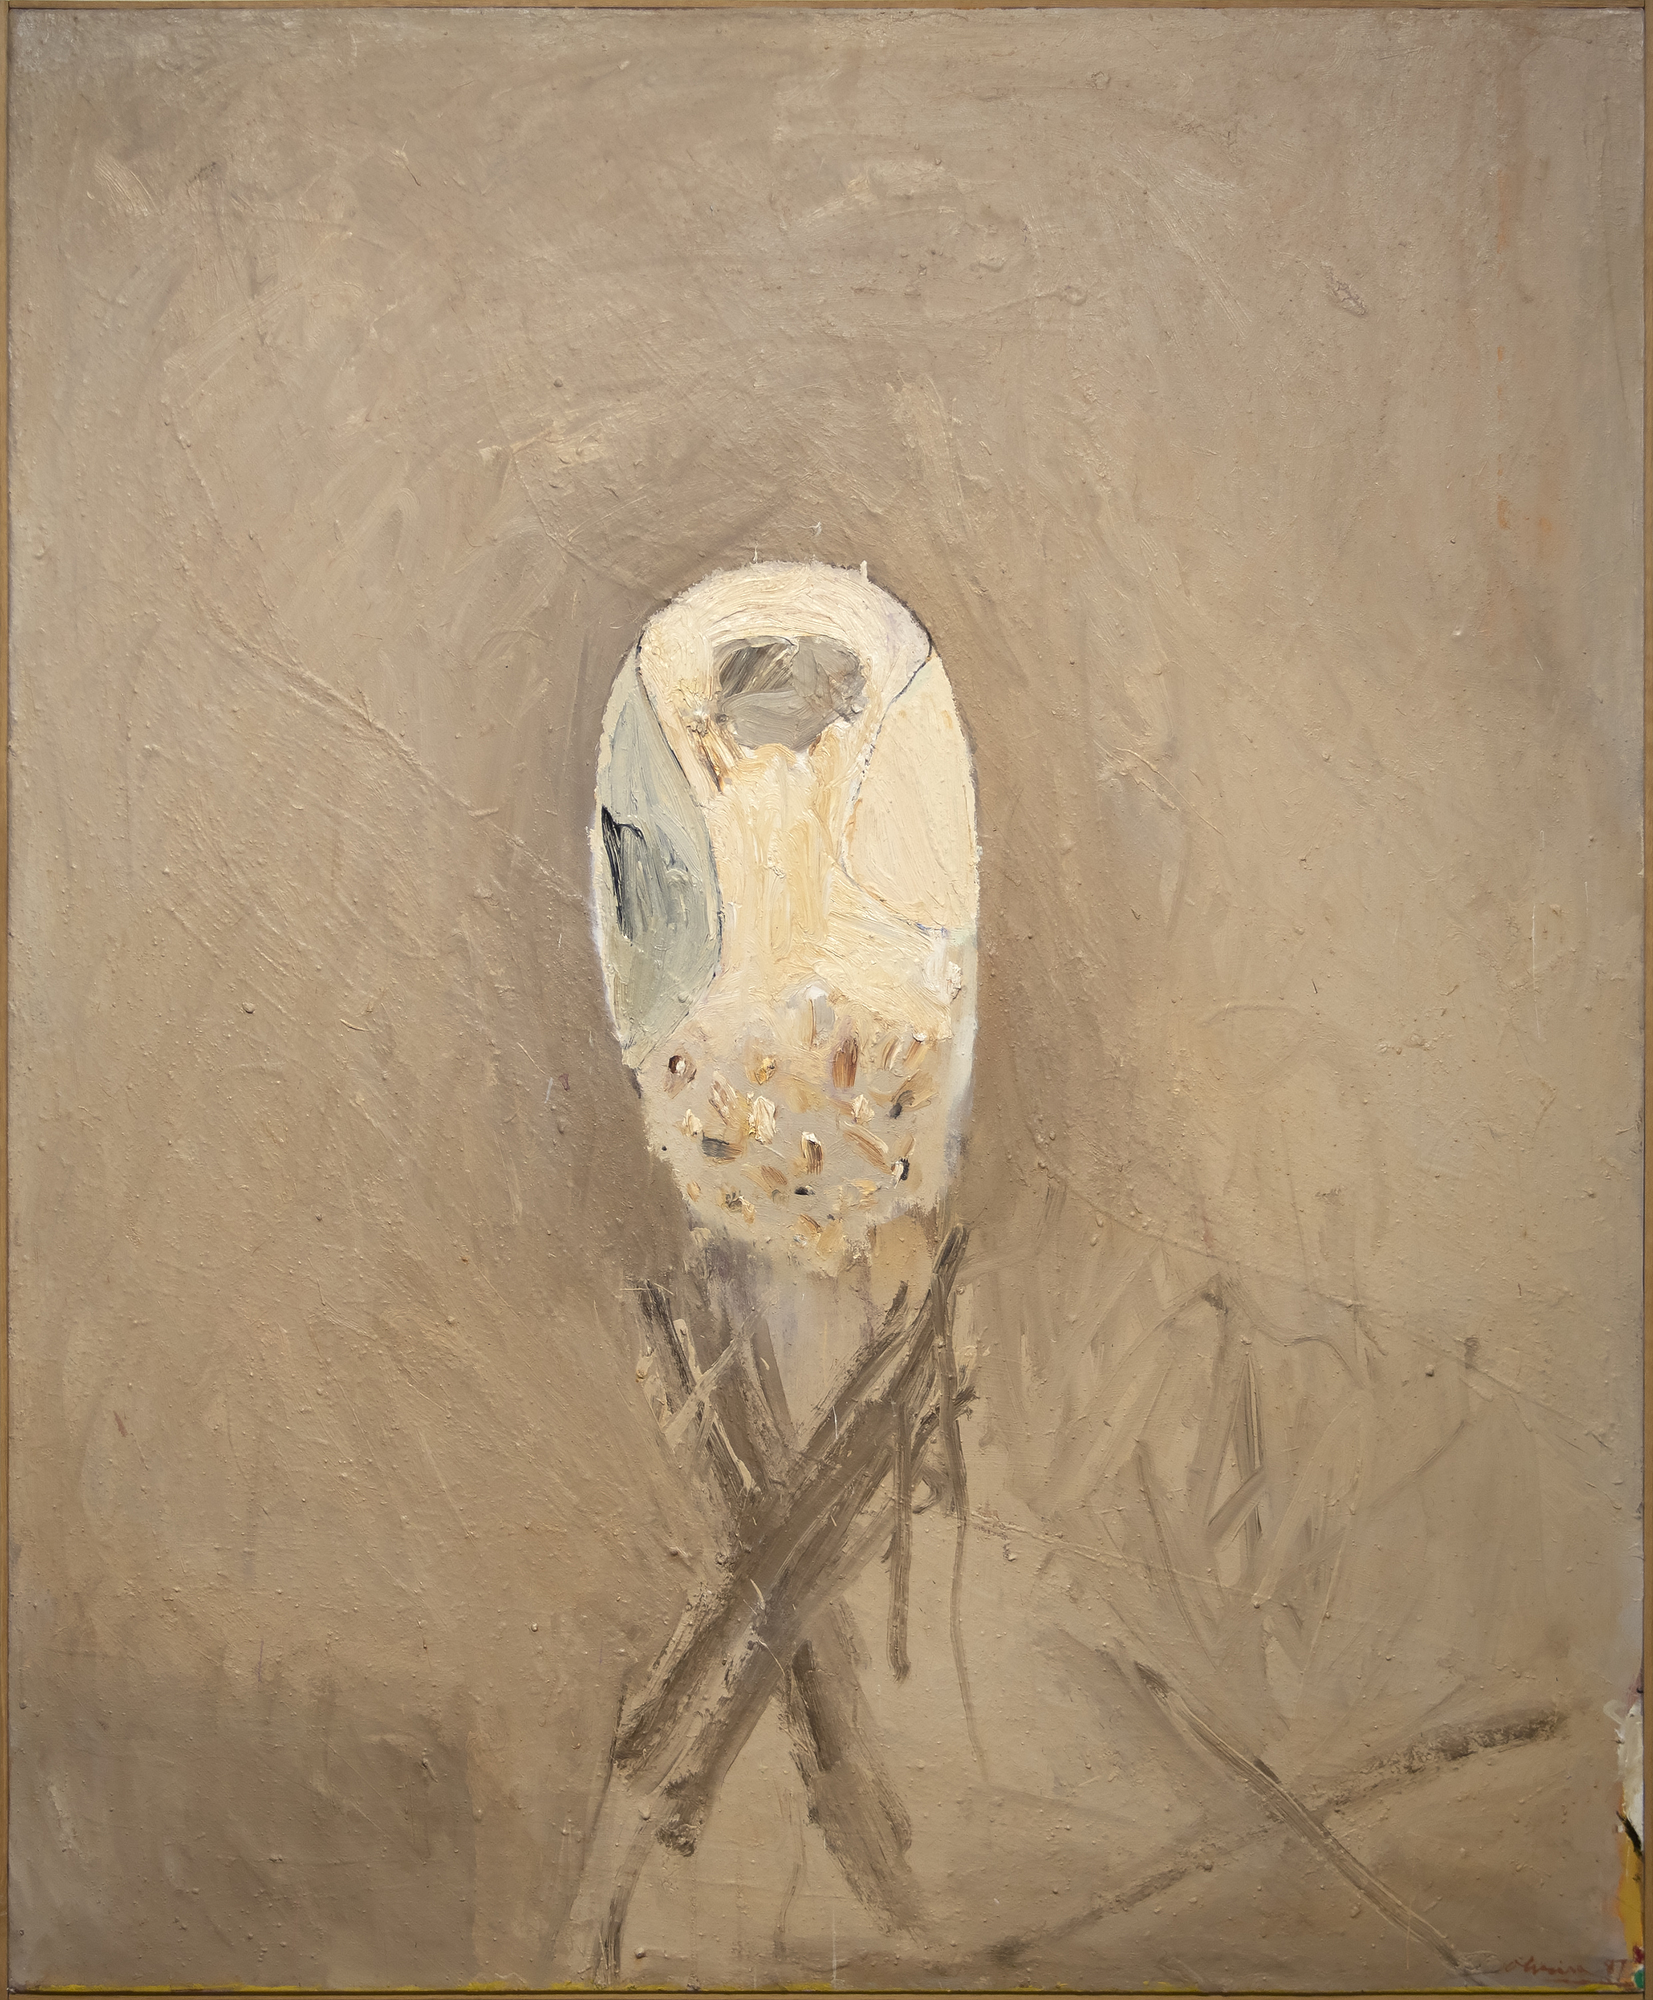 Oliveira’s existential figures convey an unease reminiscent of Giacometti's style, a characteristic that persisted throughout Oliveira's extensive career. But he also explored the intrinsic essence of birds and animals and investigated the fleeting nature of perception, where memory reconstructs ephemeral experiences. In his later years, he focused on site paintings and monographs, evoking the forgotten names of ancient civilizations or tribes as if unearthed in an archaeological excavation. With Mask, the enigmatic egg-shape, elevated as if placed upon a burial platform, and its subdued, soft, earthen terracotta palette point to tribal associations and may reflect his interest as a collector of Indigenous masks, mostly from Mexico.